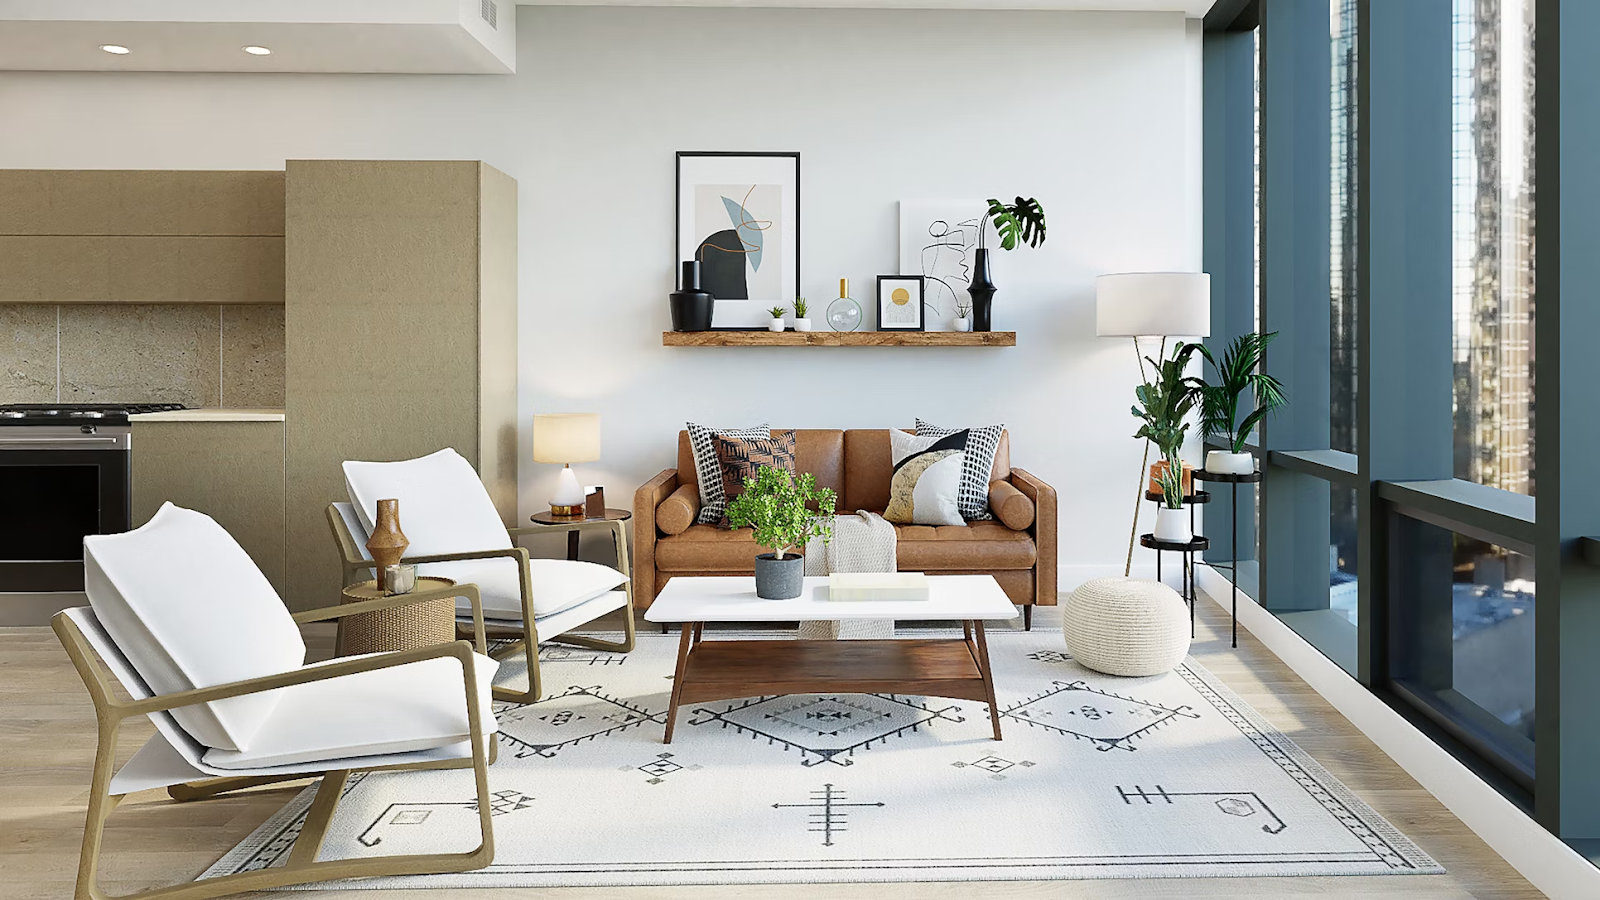 Renewal of Rental: New Decoration Trends to Revamp Your Flat